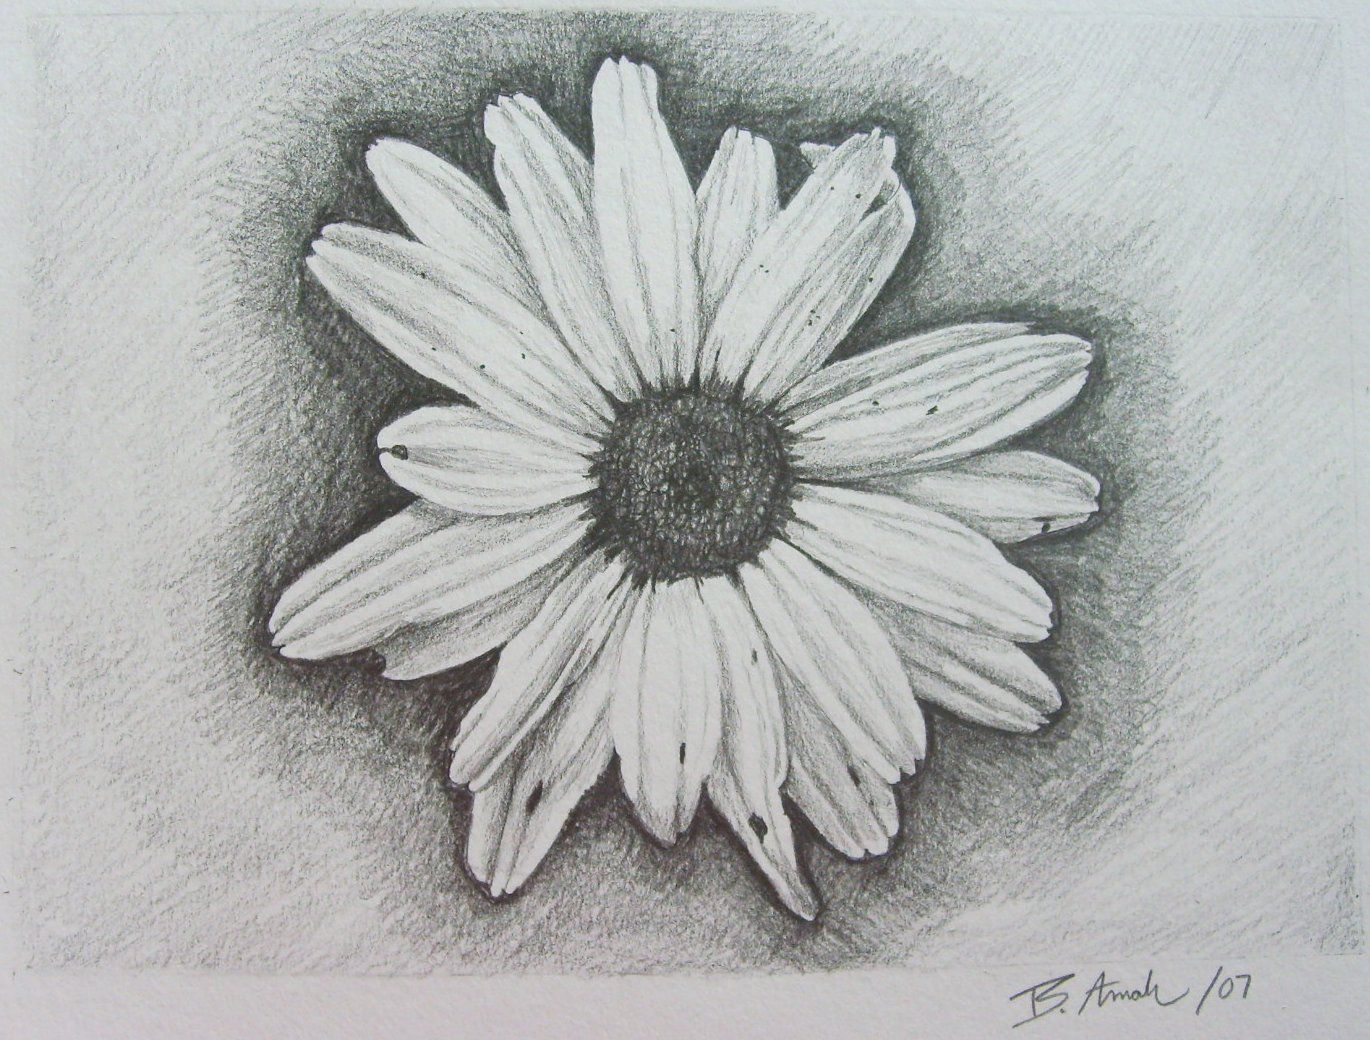 daisy tattoo designs -reminds me to be thankful for the littlest things in life